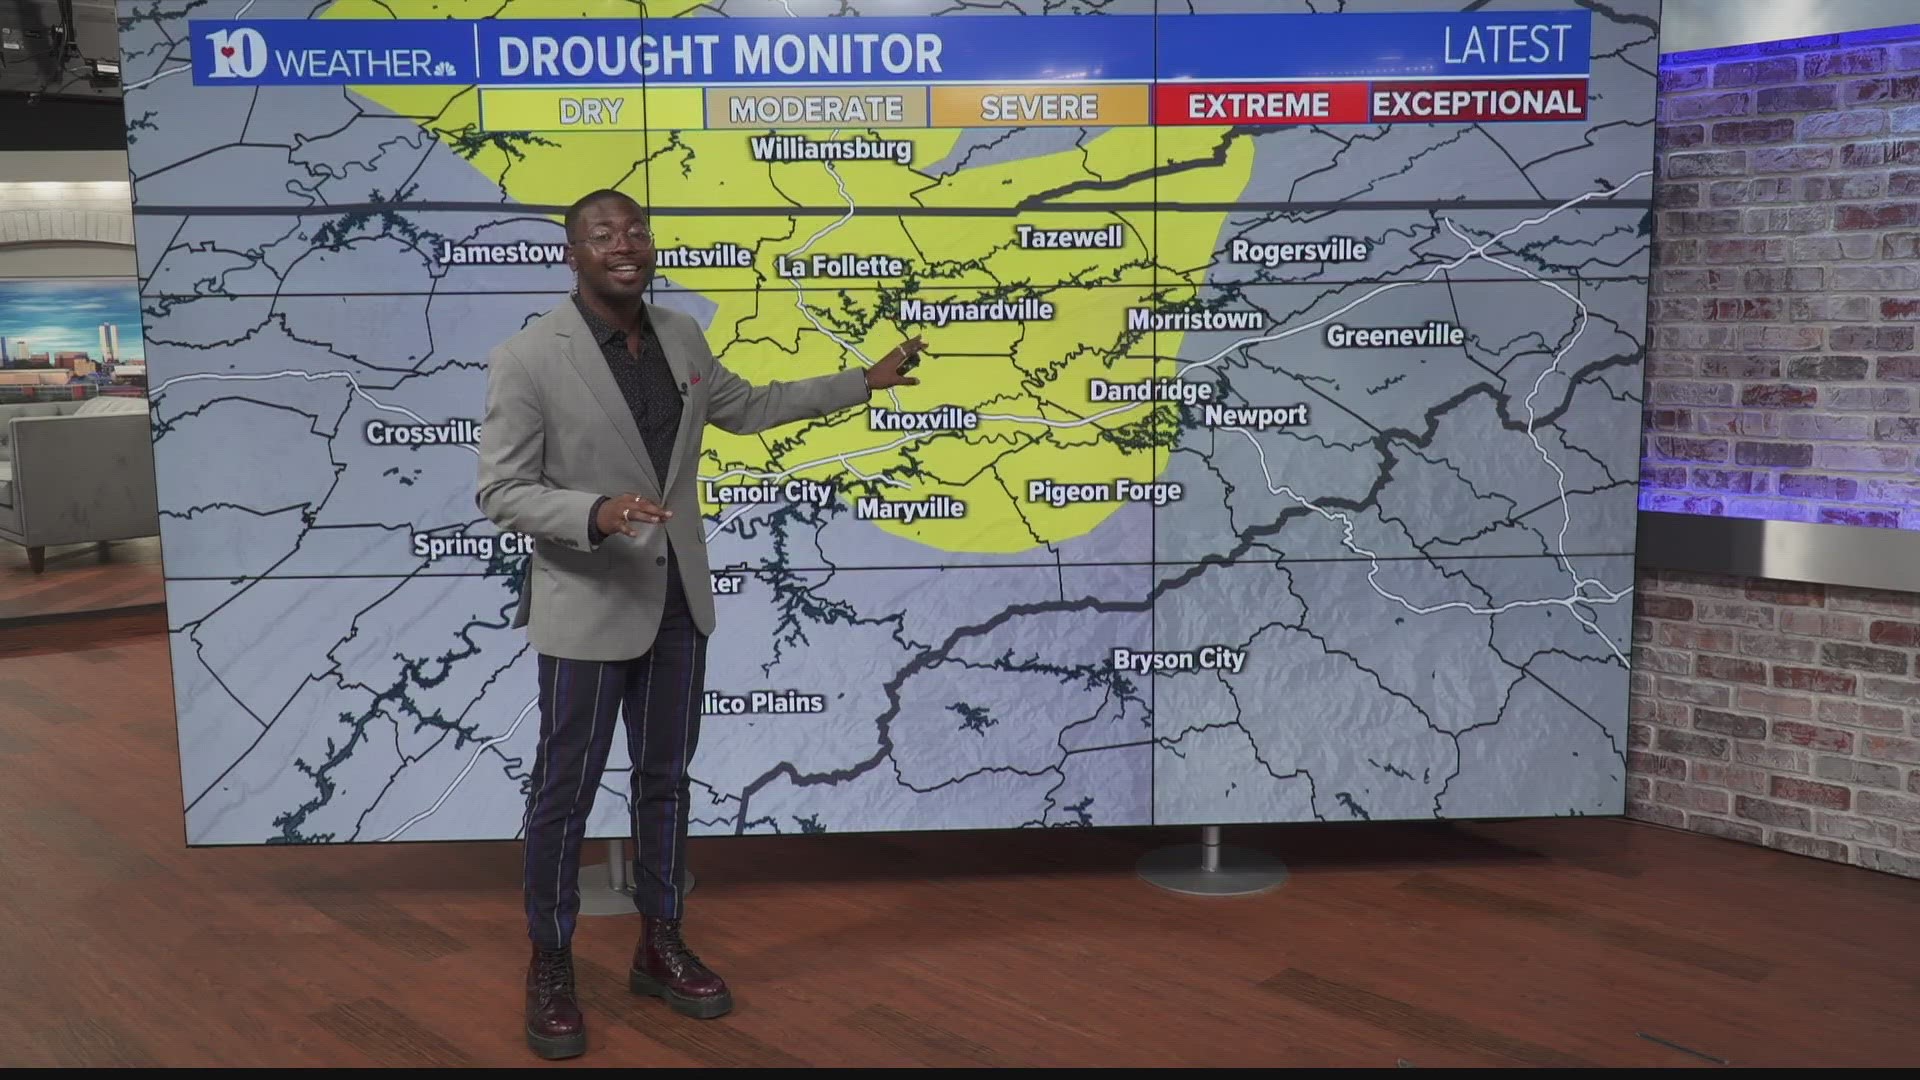 Continent-wide drought activity plus growing dryness in East Tennessee has many praying for a big bout of rain